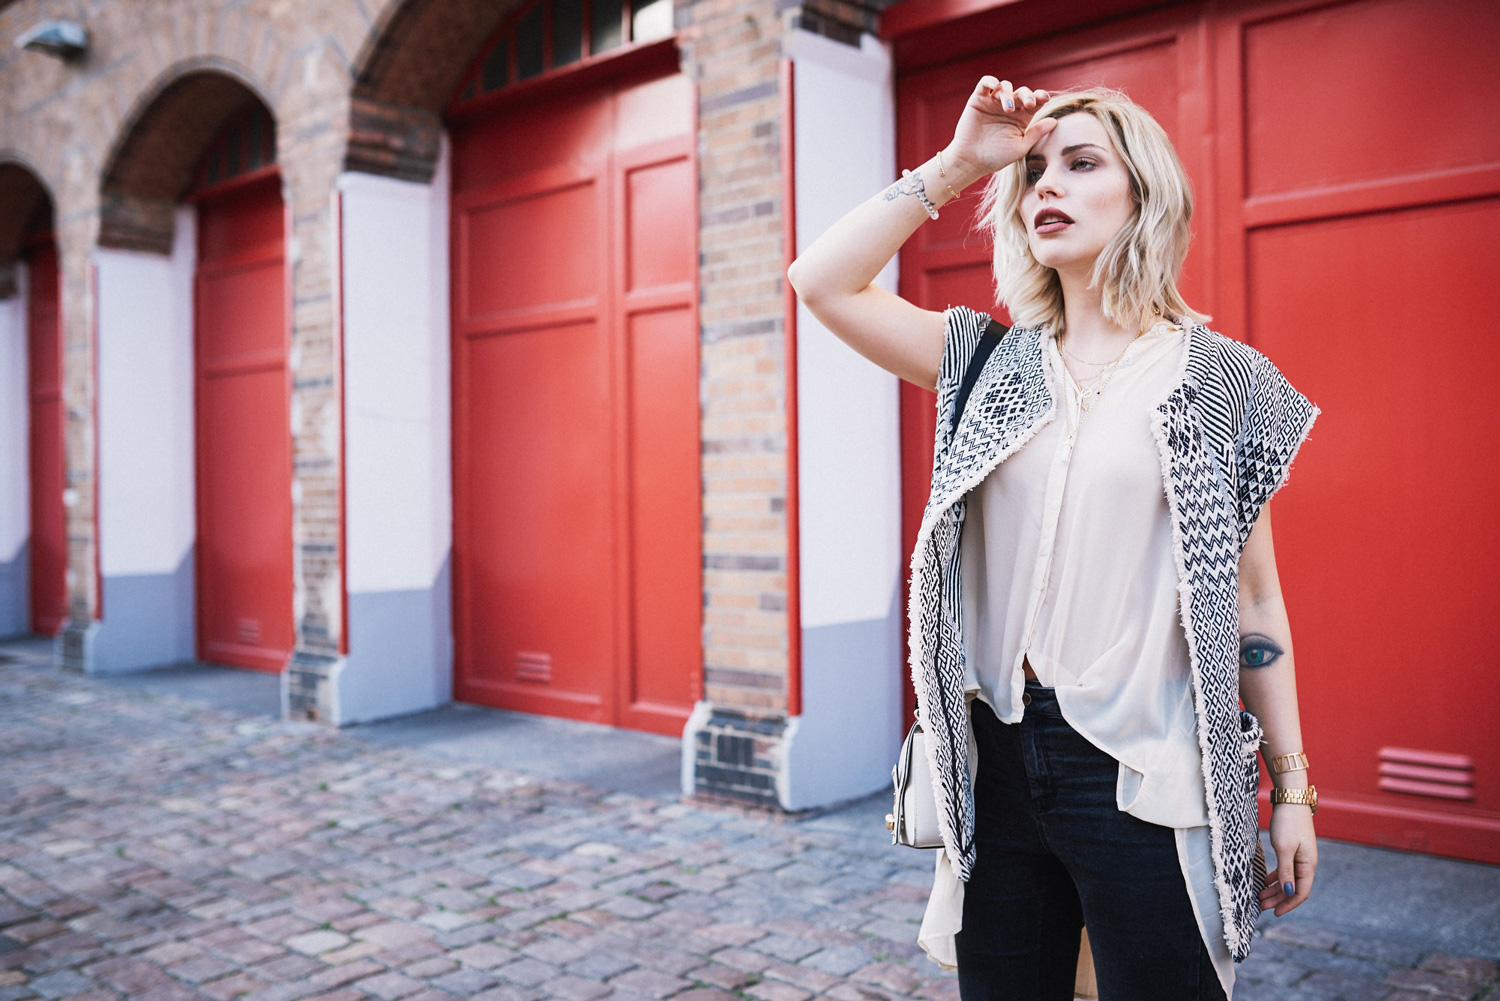 view more details on my blog | How to style a oversize vest | Boho fashion from Berlin | outfit |